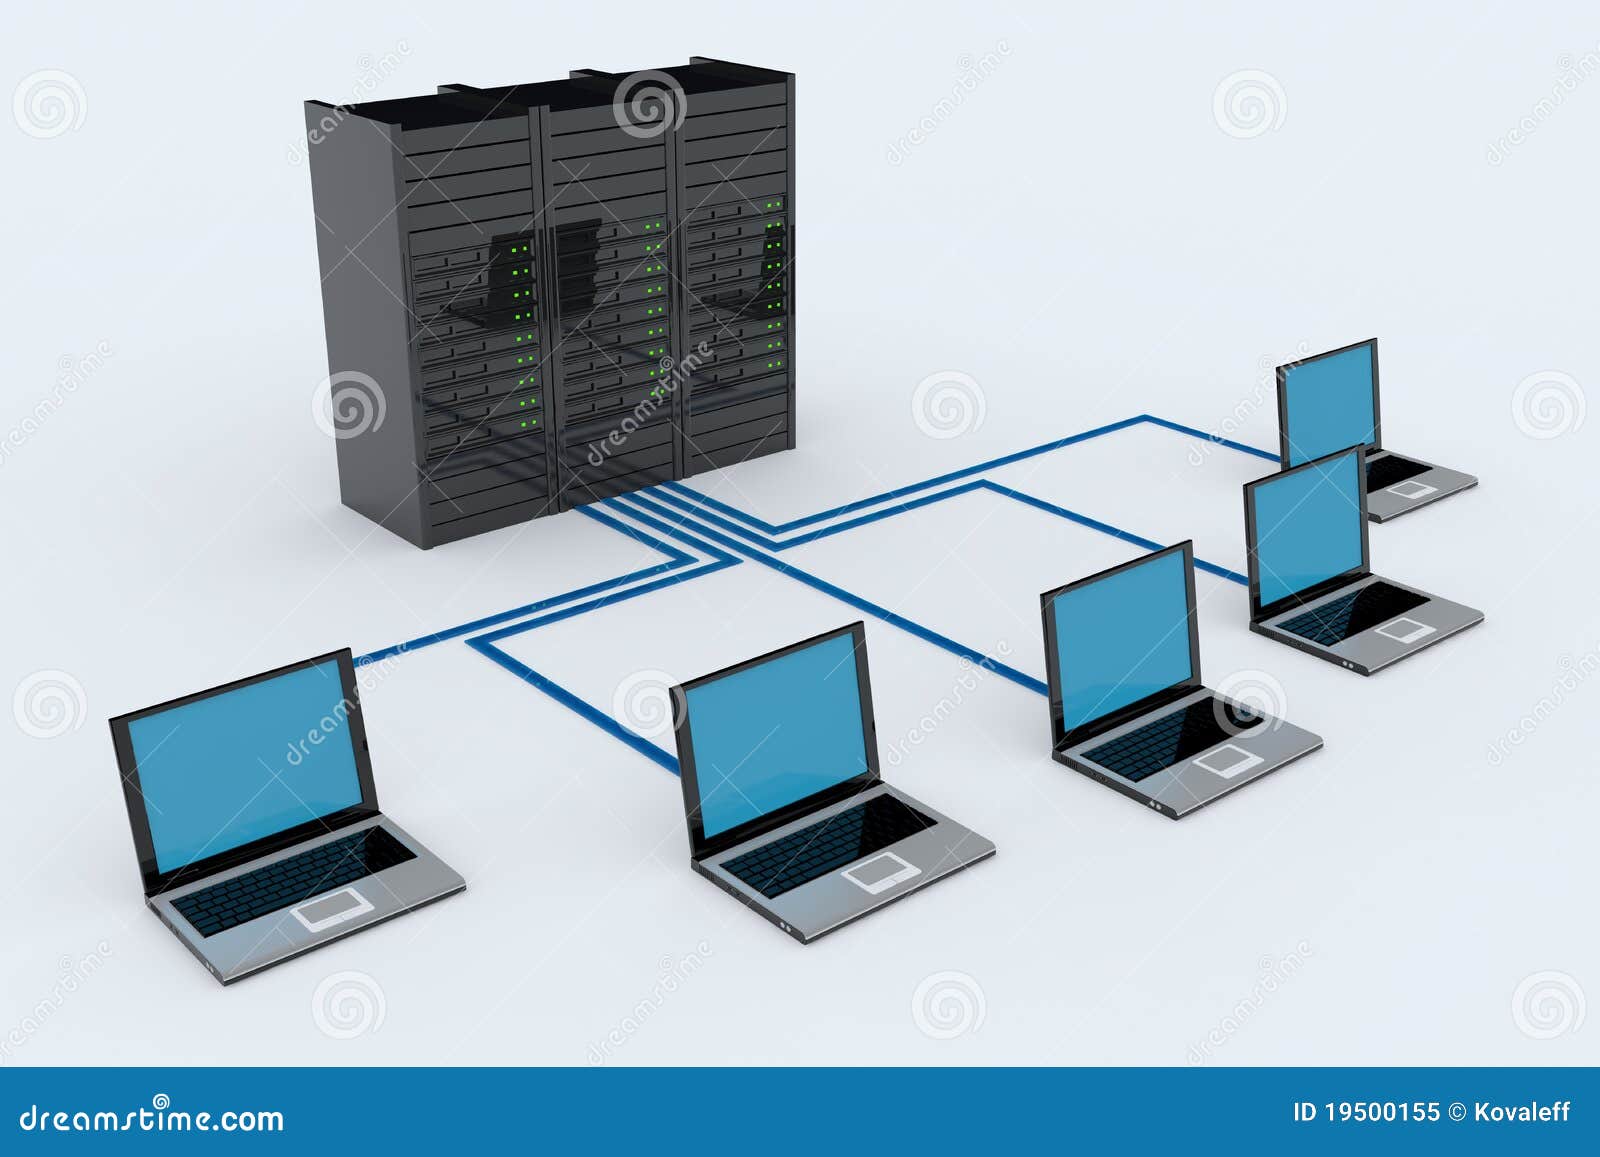 computer network with server